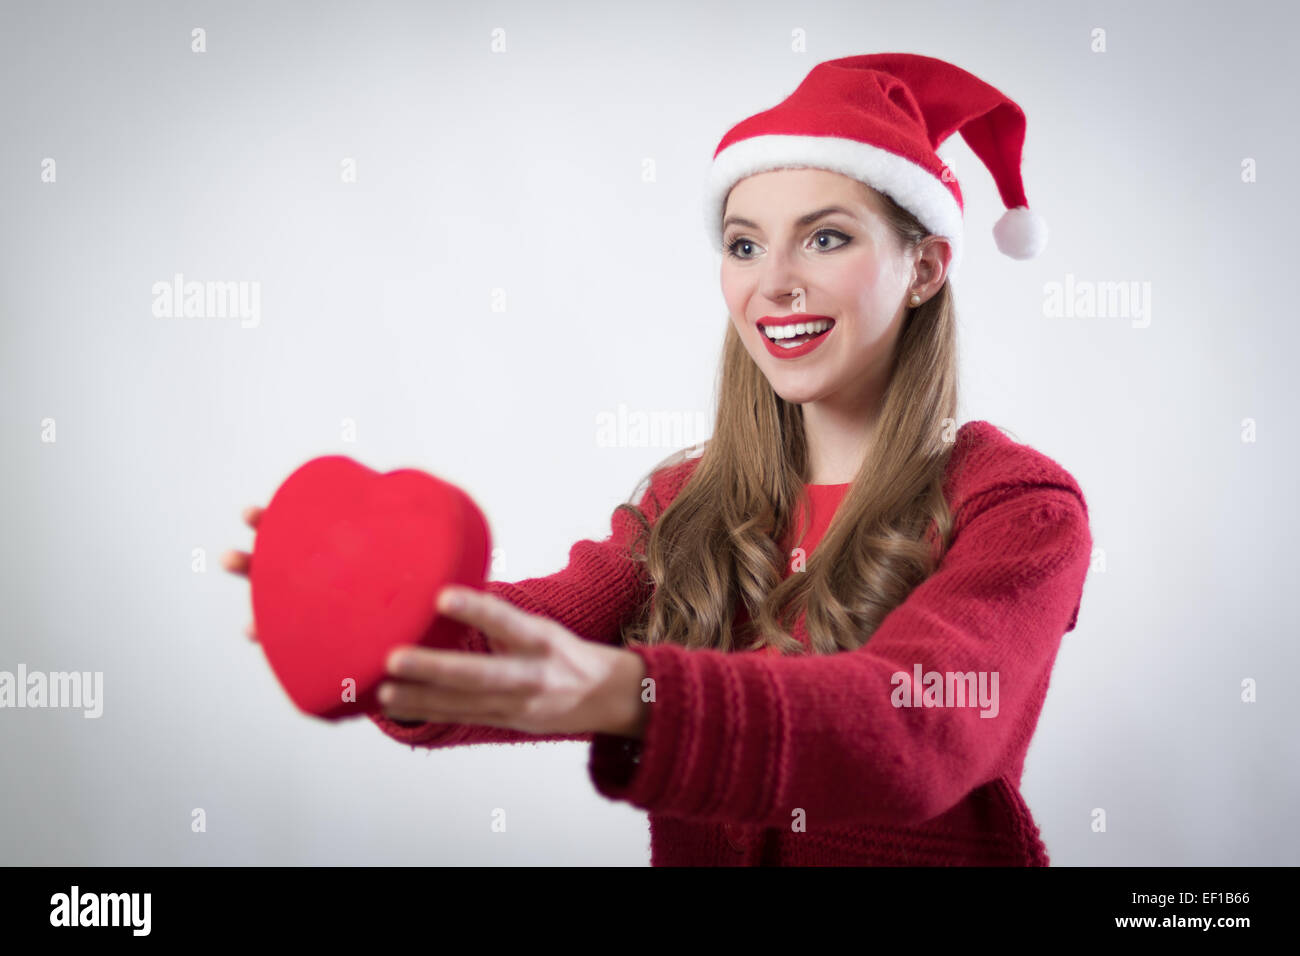 cute young woman with Santa Claus hat and a red heart in a white background Stock Photo